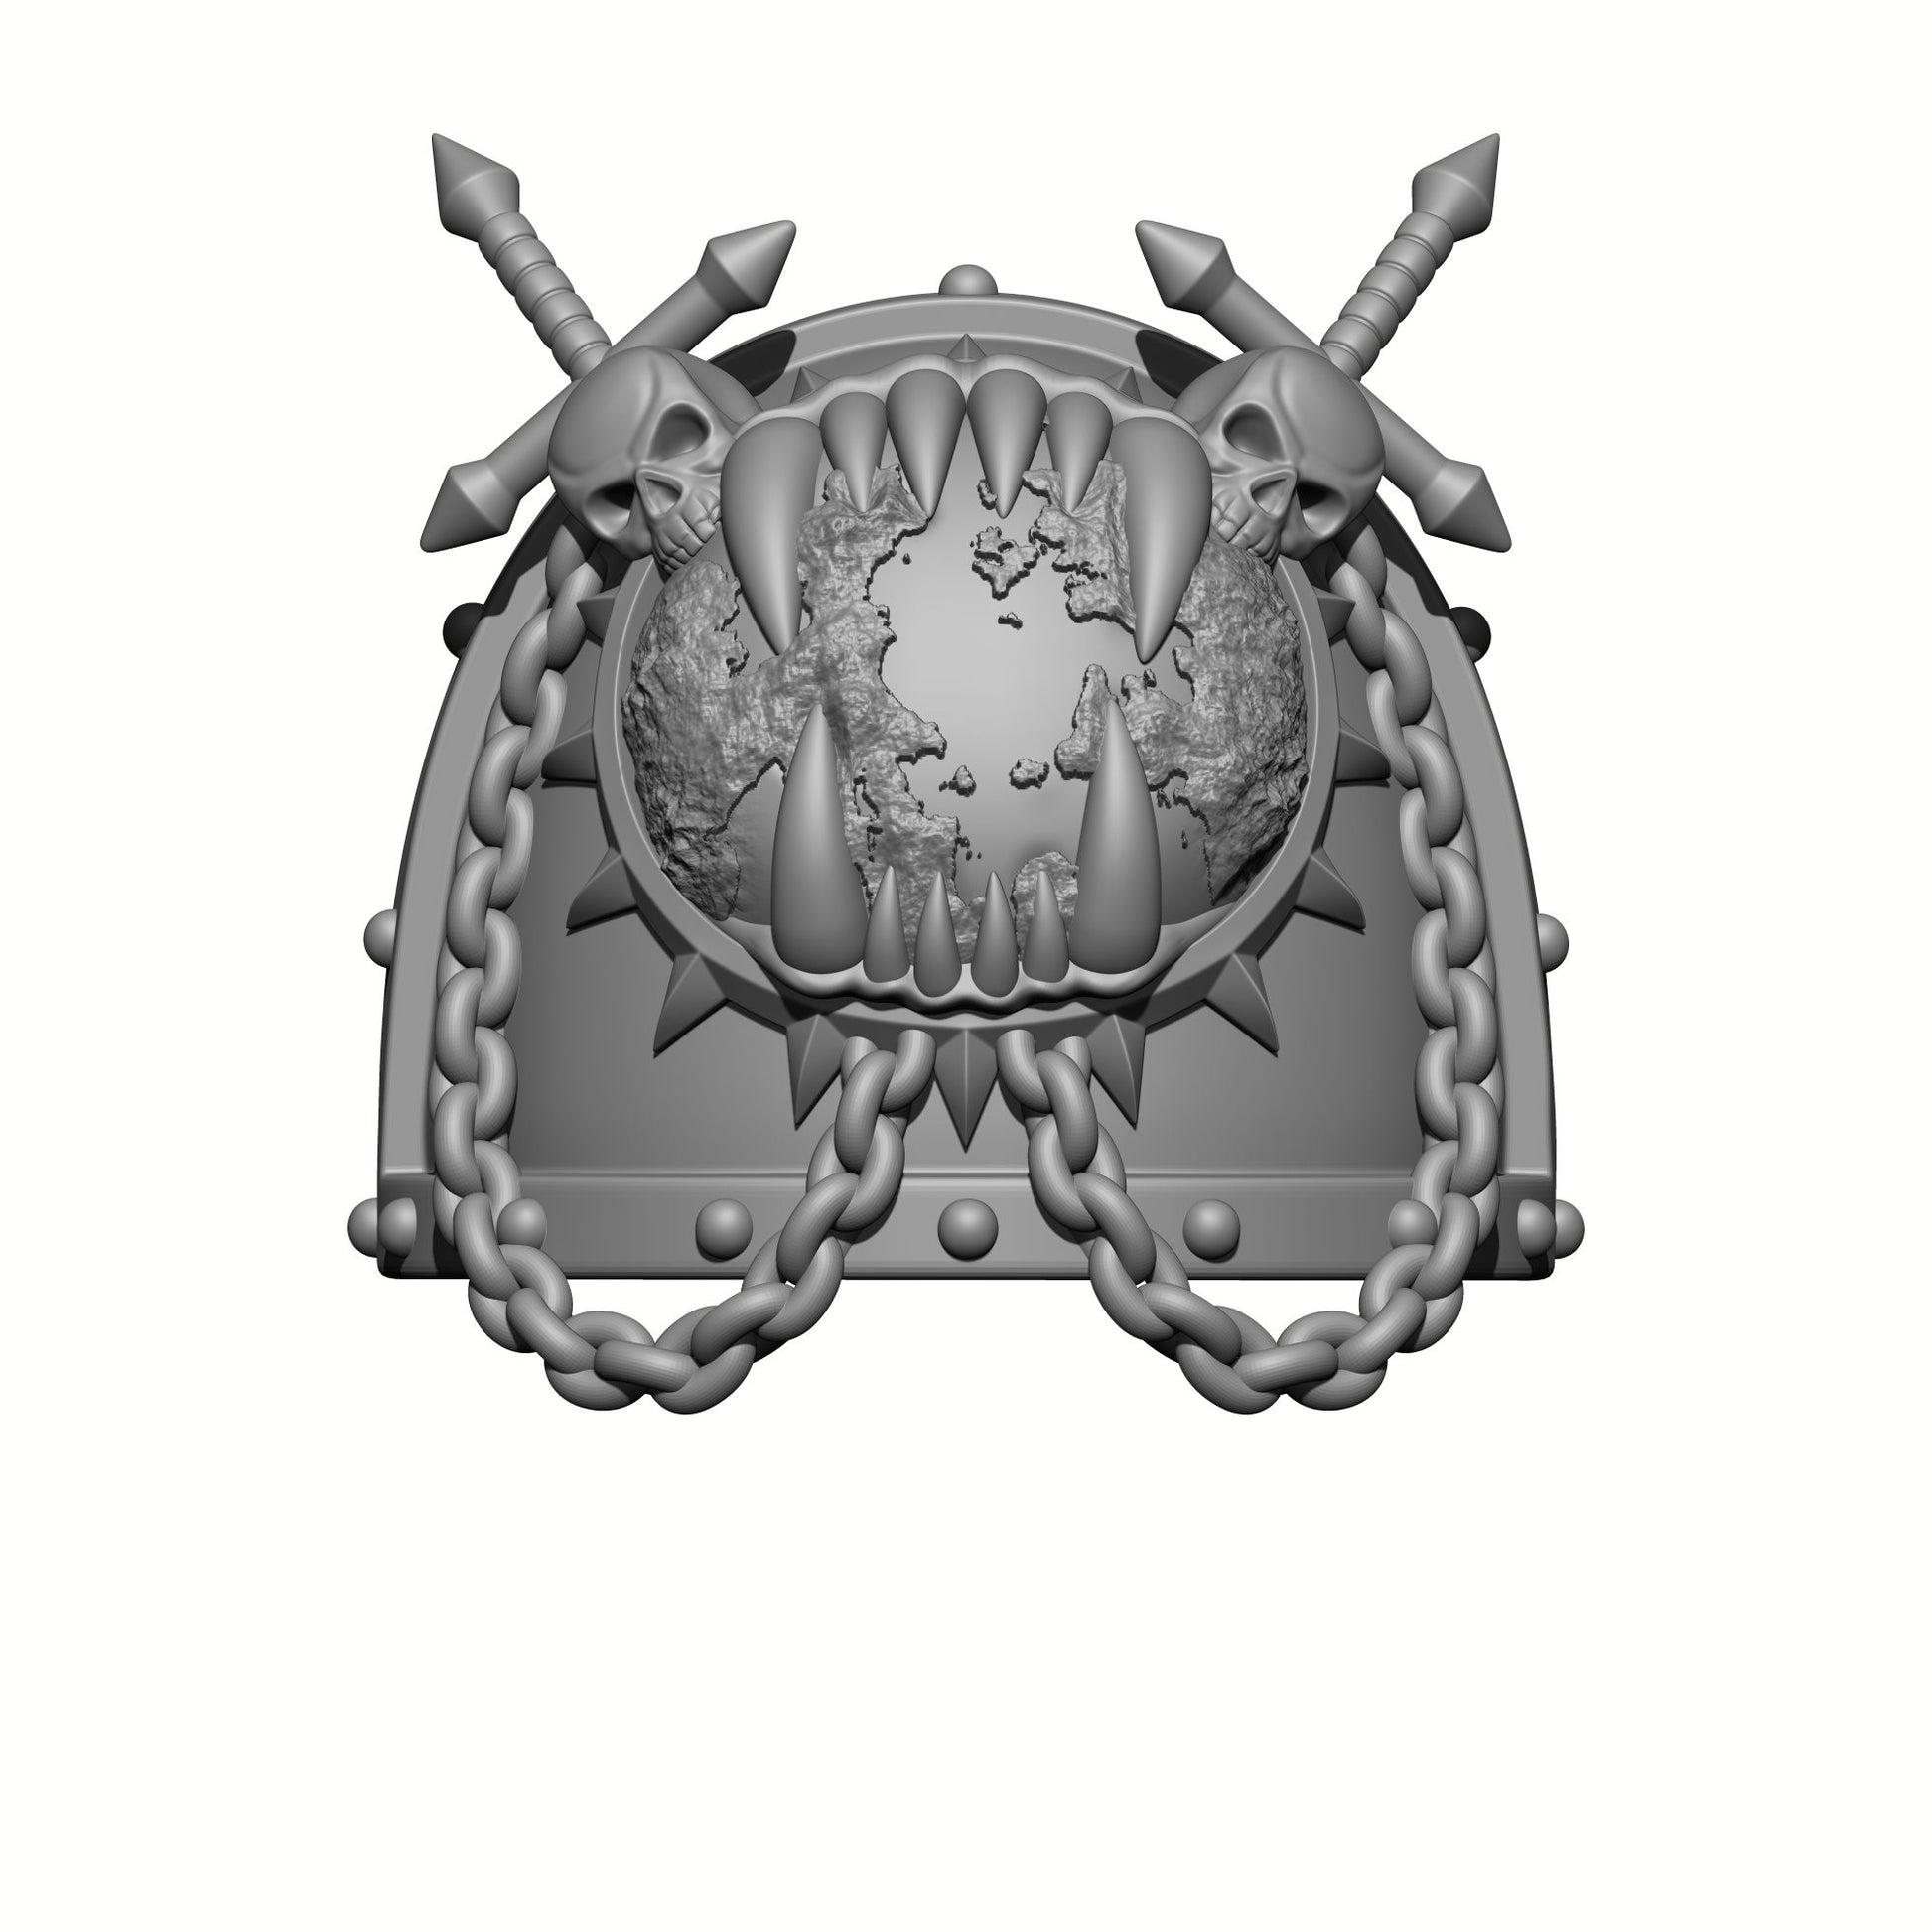 World Eaters Chapter MKVII Shoulder Pad Maw eating Planet Two Skulls Chains and Two Swords: Compatible with McFarlane Space Marine Action Figures Khorne Berserker designed by Fantasy World Games